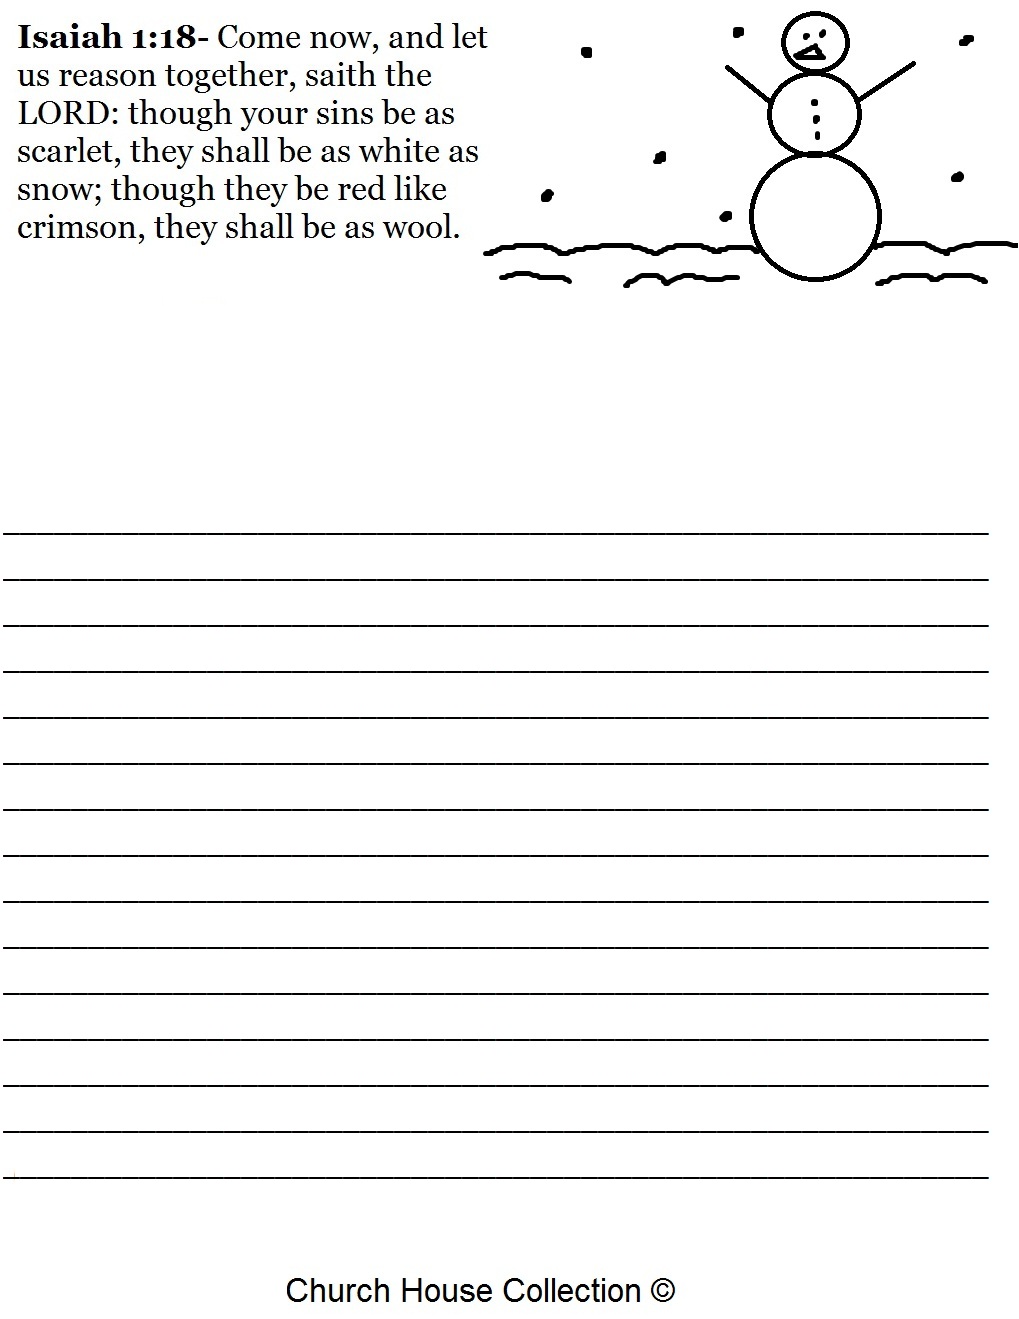 Free Christmas Snowman Isaiah 1:18 Writing Paper Printable Template for kids in Sunday school by Church House Collection- Christmas Sunday School lessons